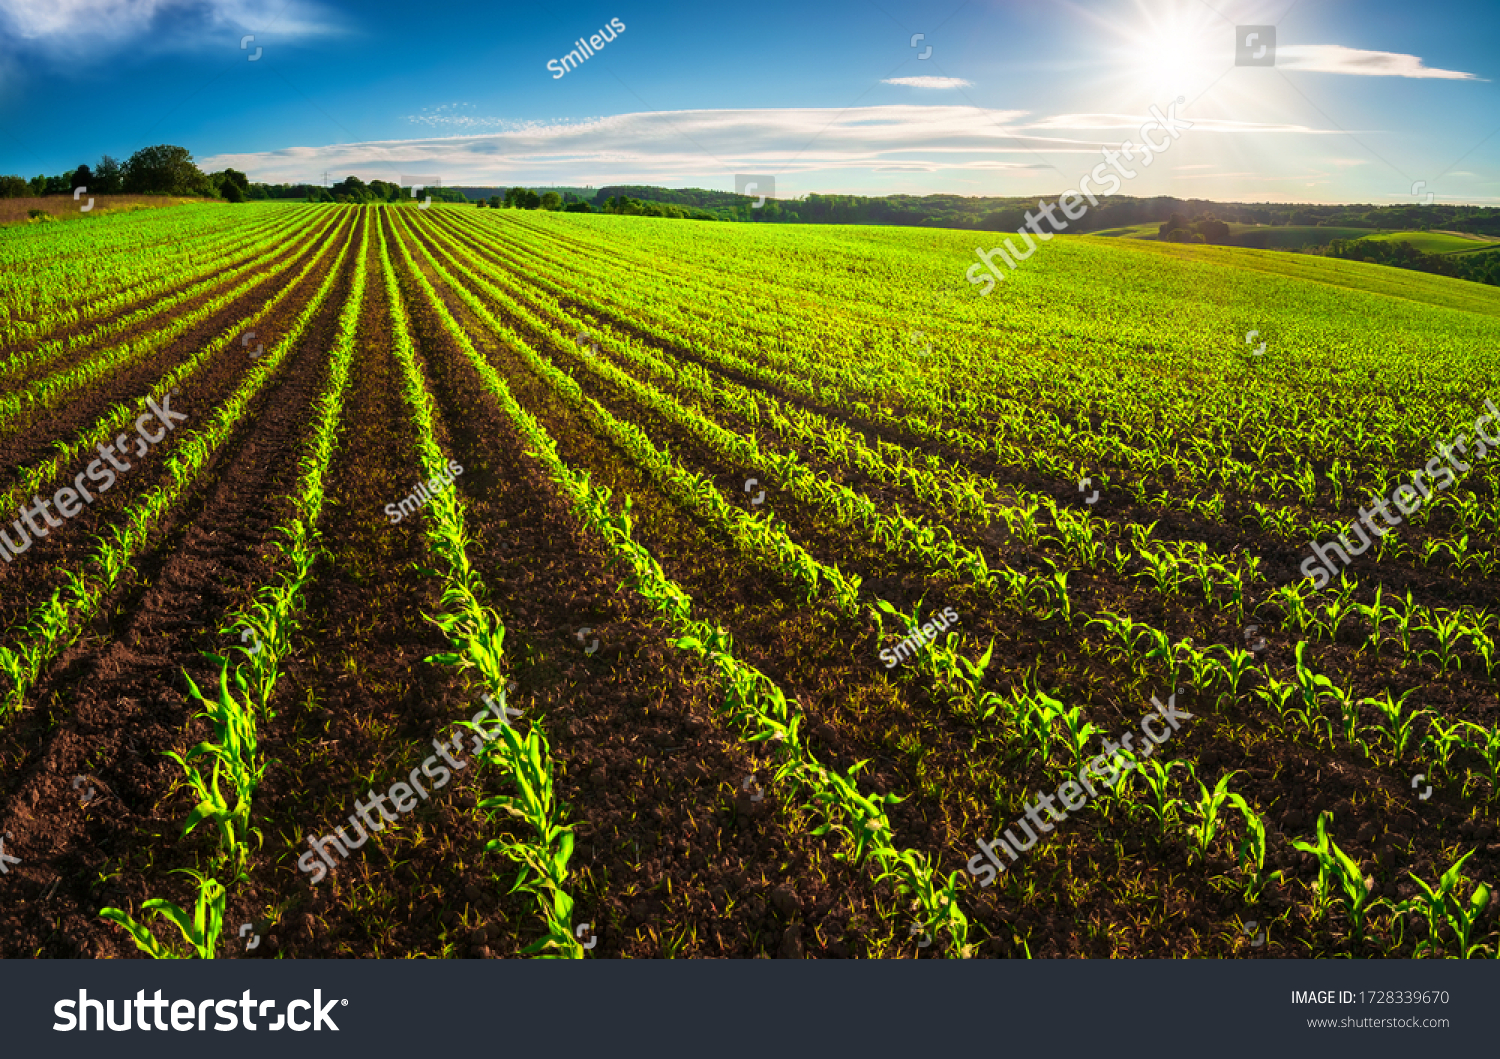 Agriculture shot: rows of young corn plants growing on a vast field with dark fertile soil leading to the horizon #1728339670